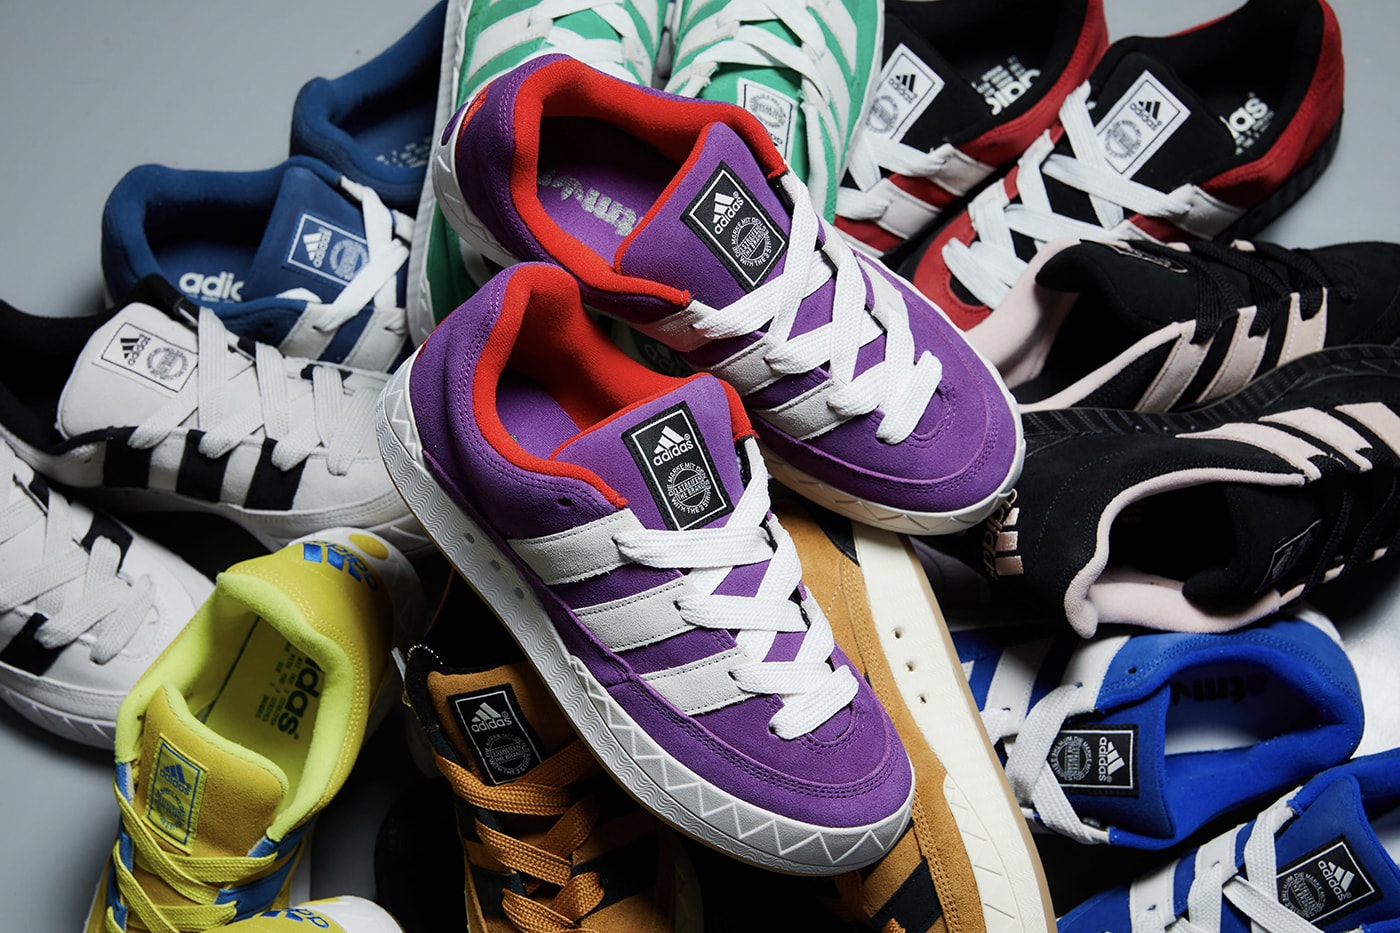 atmos adidas adimatic purple suede fourth colorway harajuku red collaboration release info date price nalu apparel teees